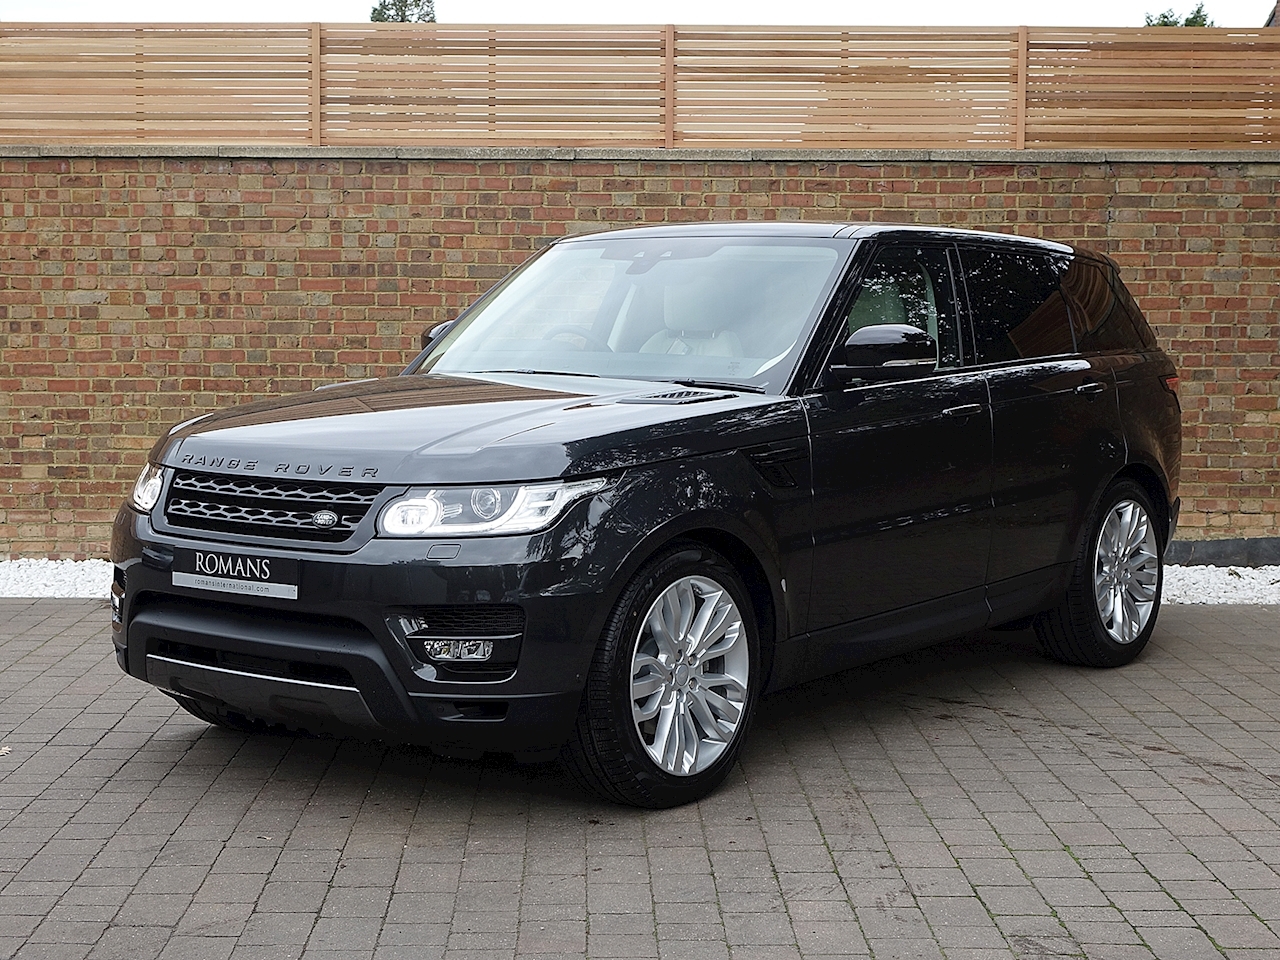 2017 Used Land Rover Range Rover Sport 3.0 V6 Supercharged